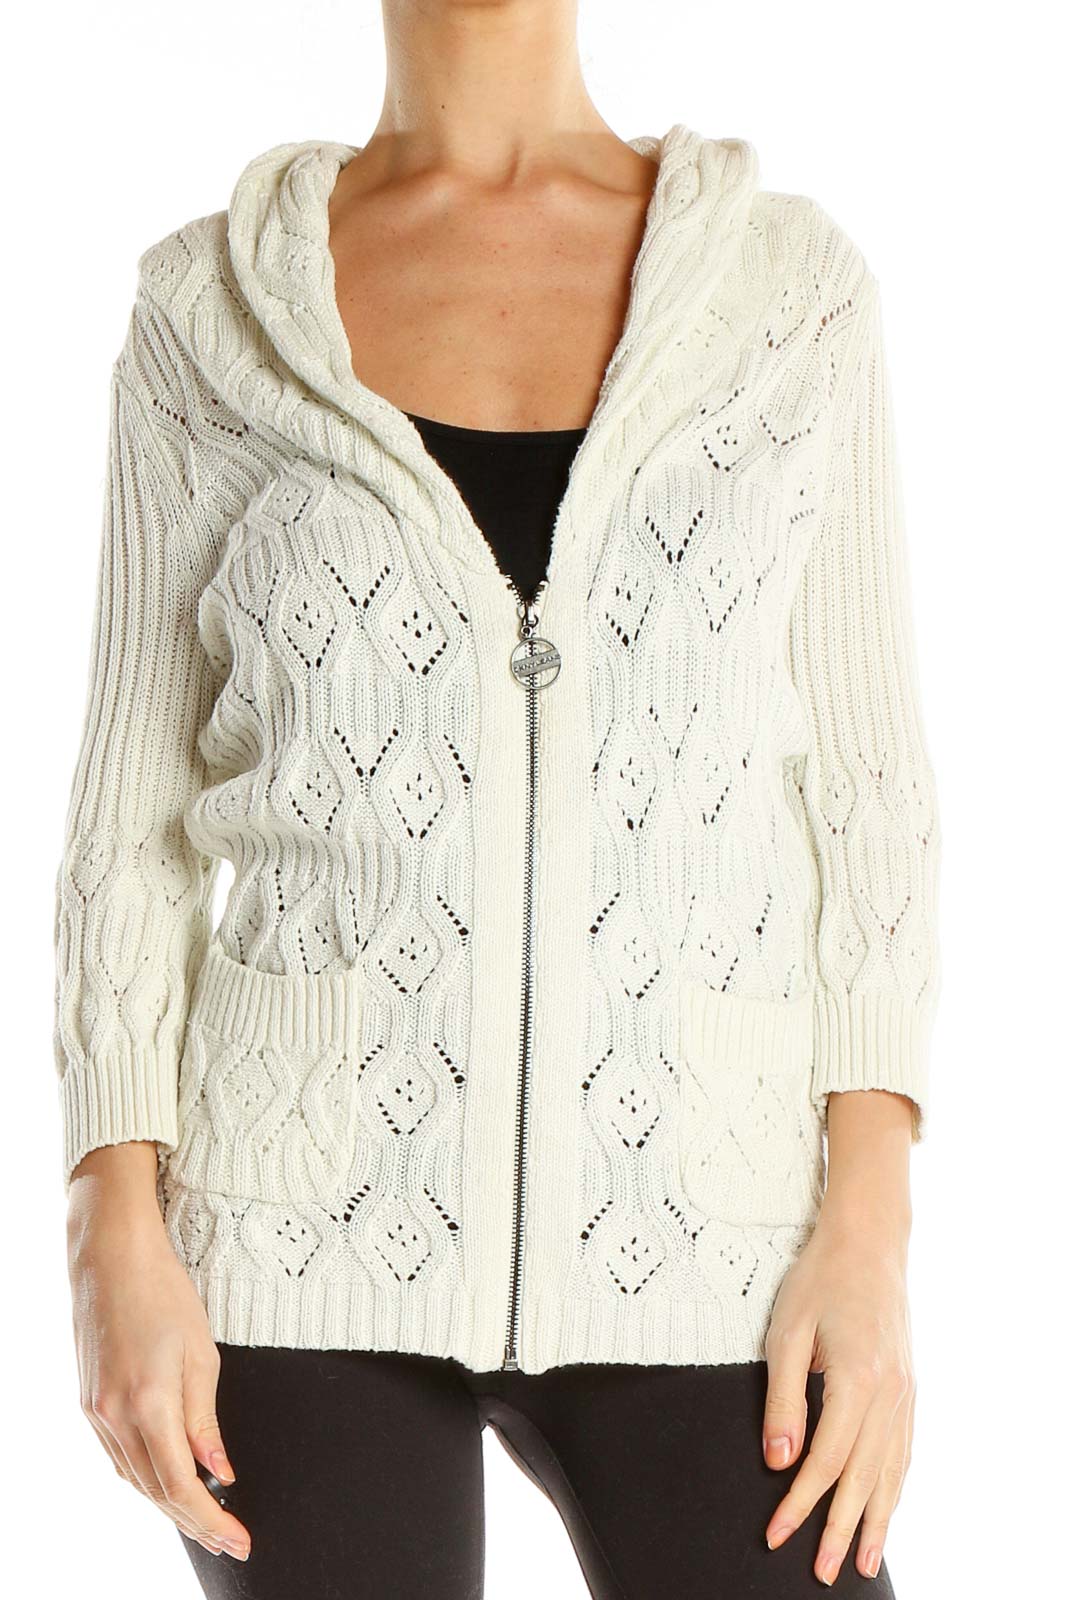 White Cable Knit Zip-Up Sweatshirt Front